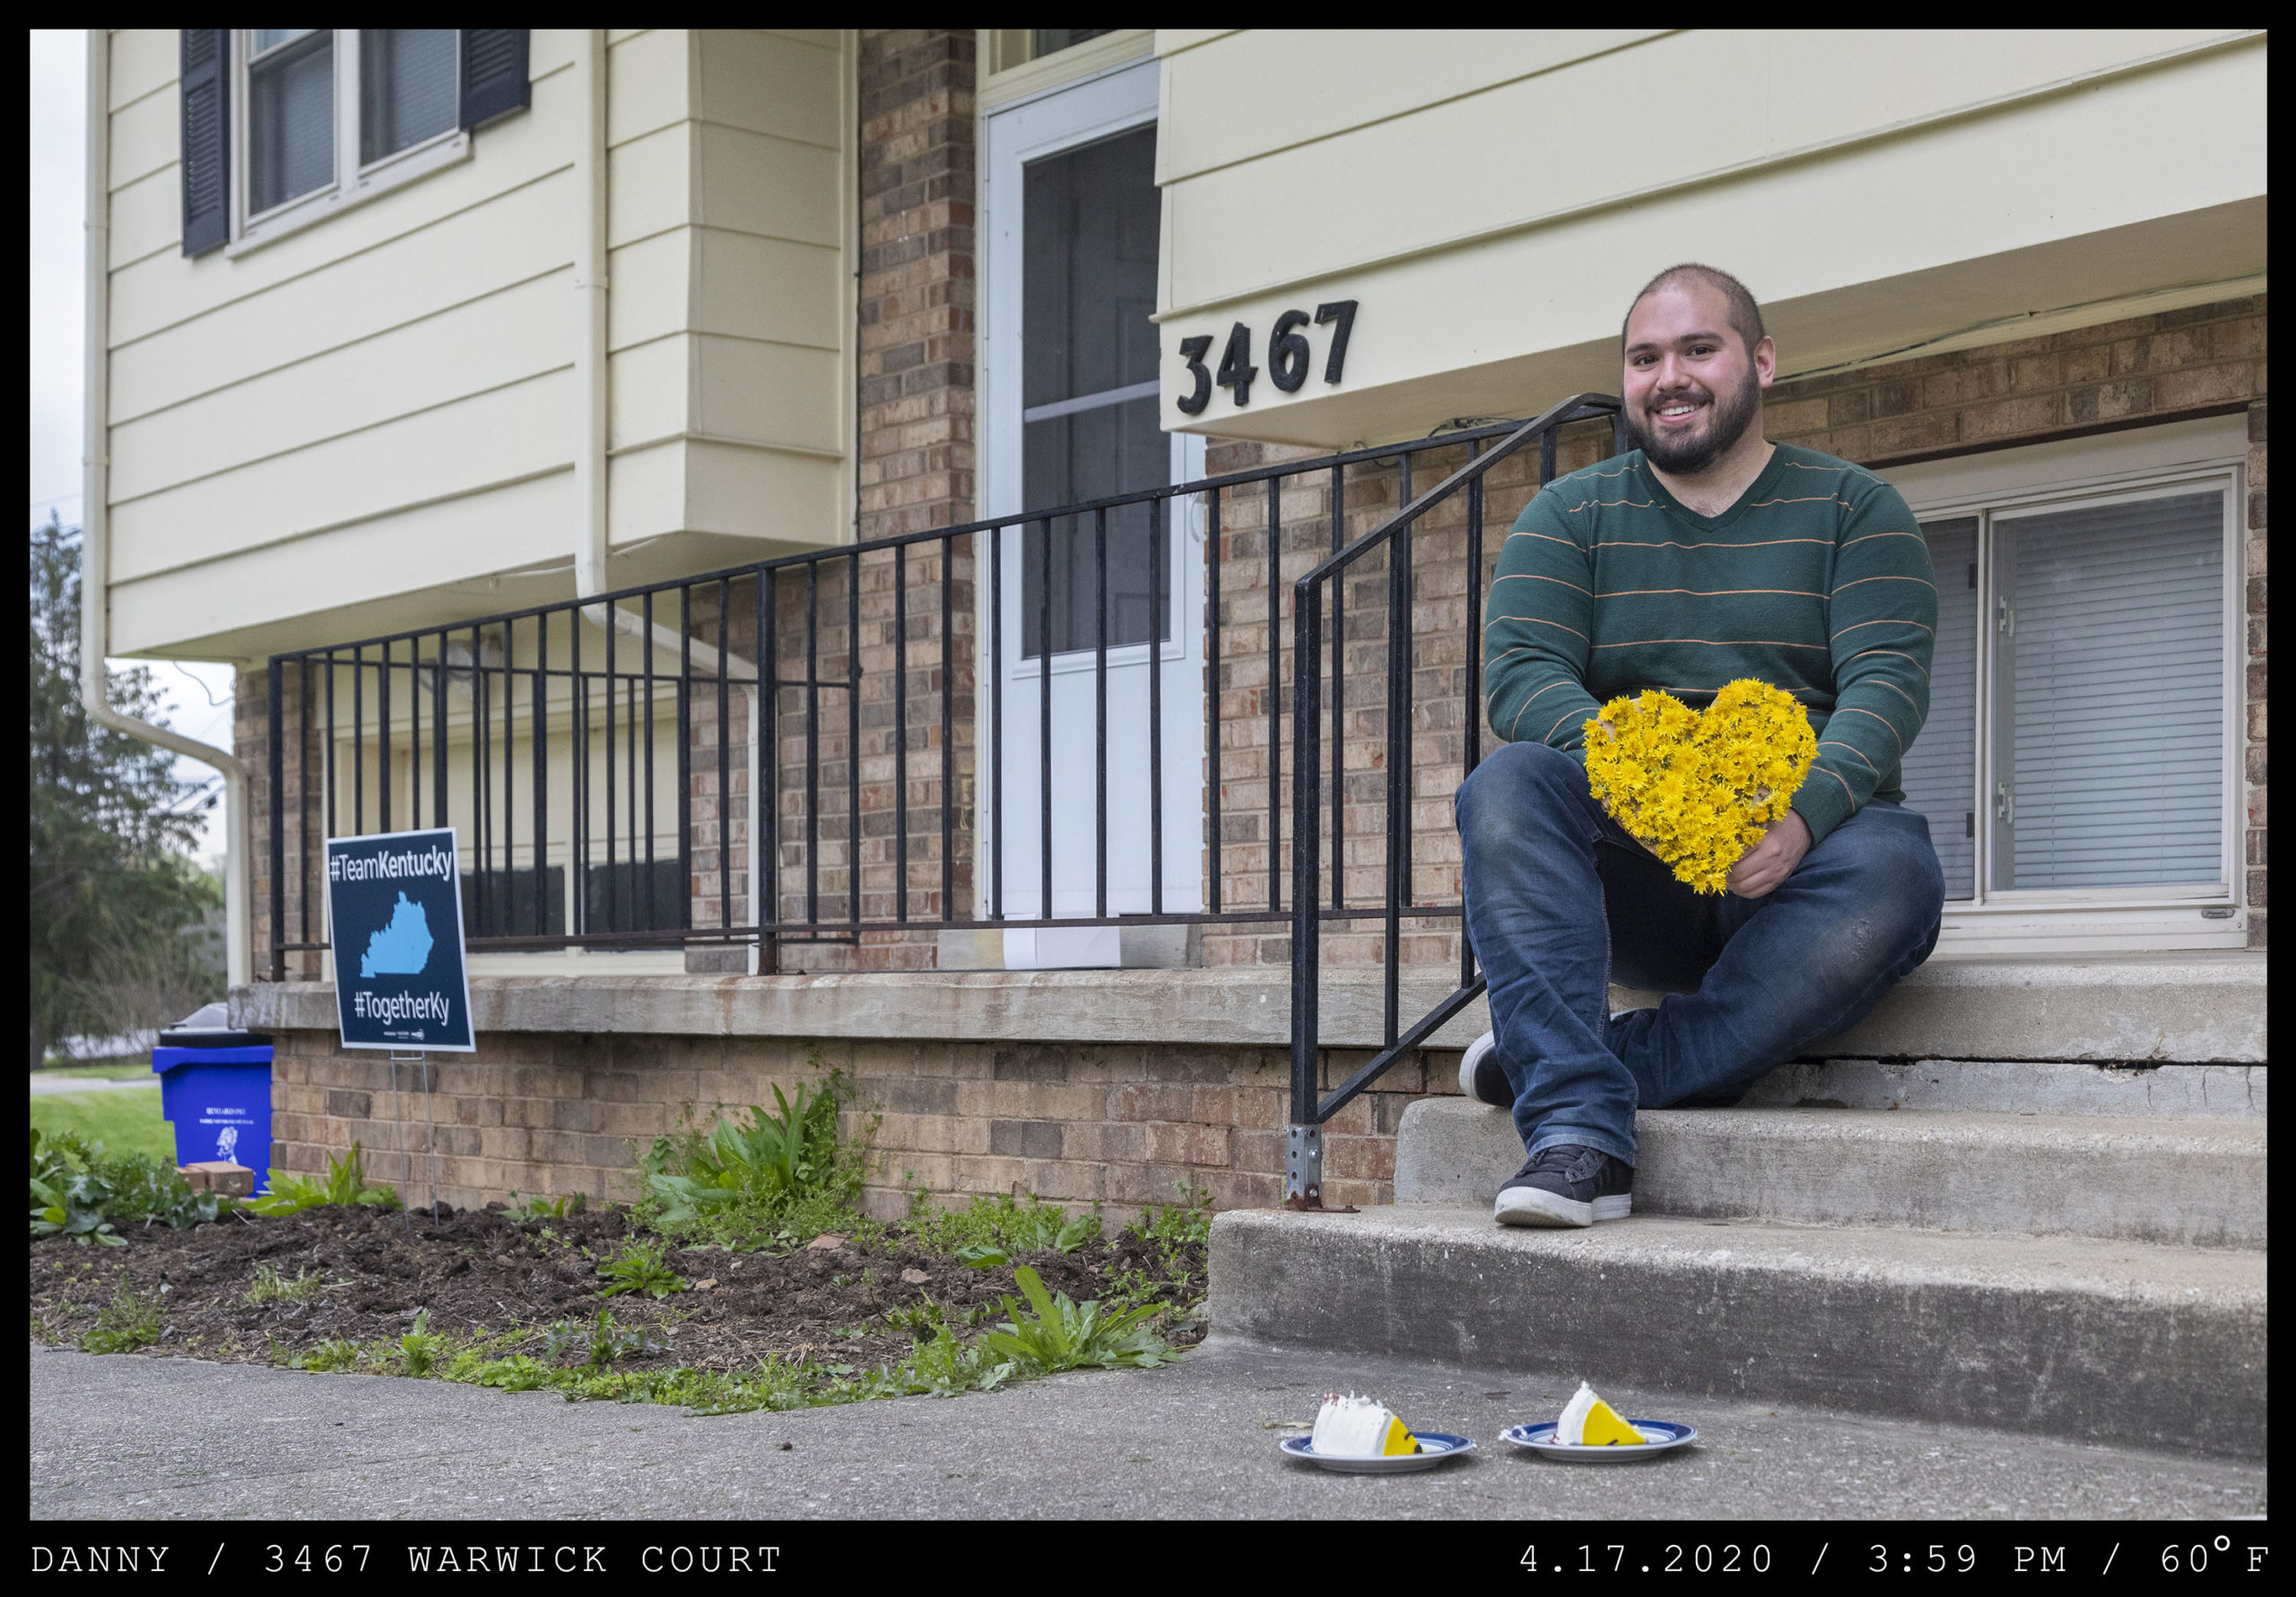 A man in a green striped shirt and jeans with a crew cut and beard is seated on concrete steps holding a yellow floral arrangement in the shape of a heart. Two slices of cake are at his feet on plates.